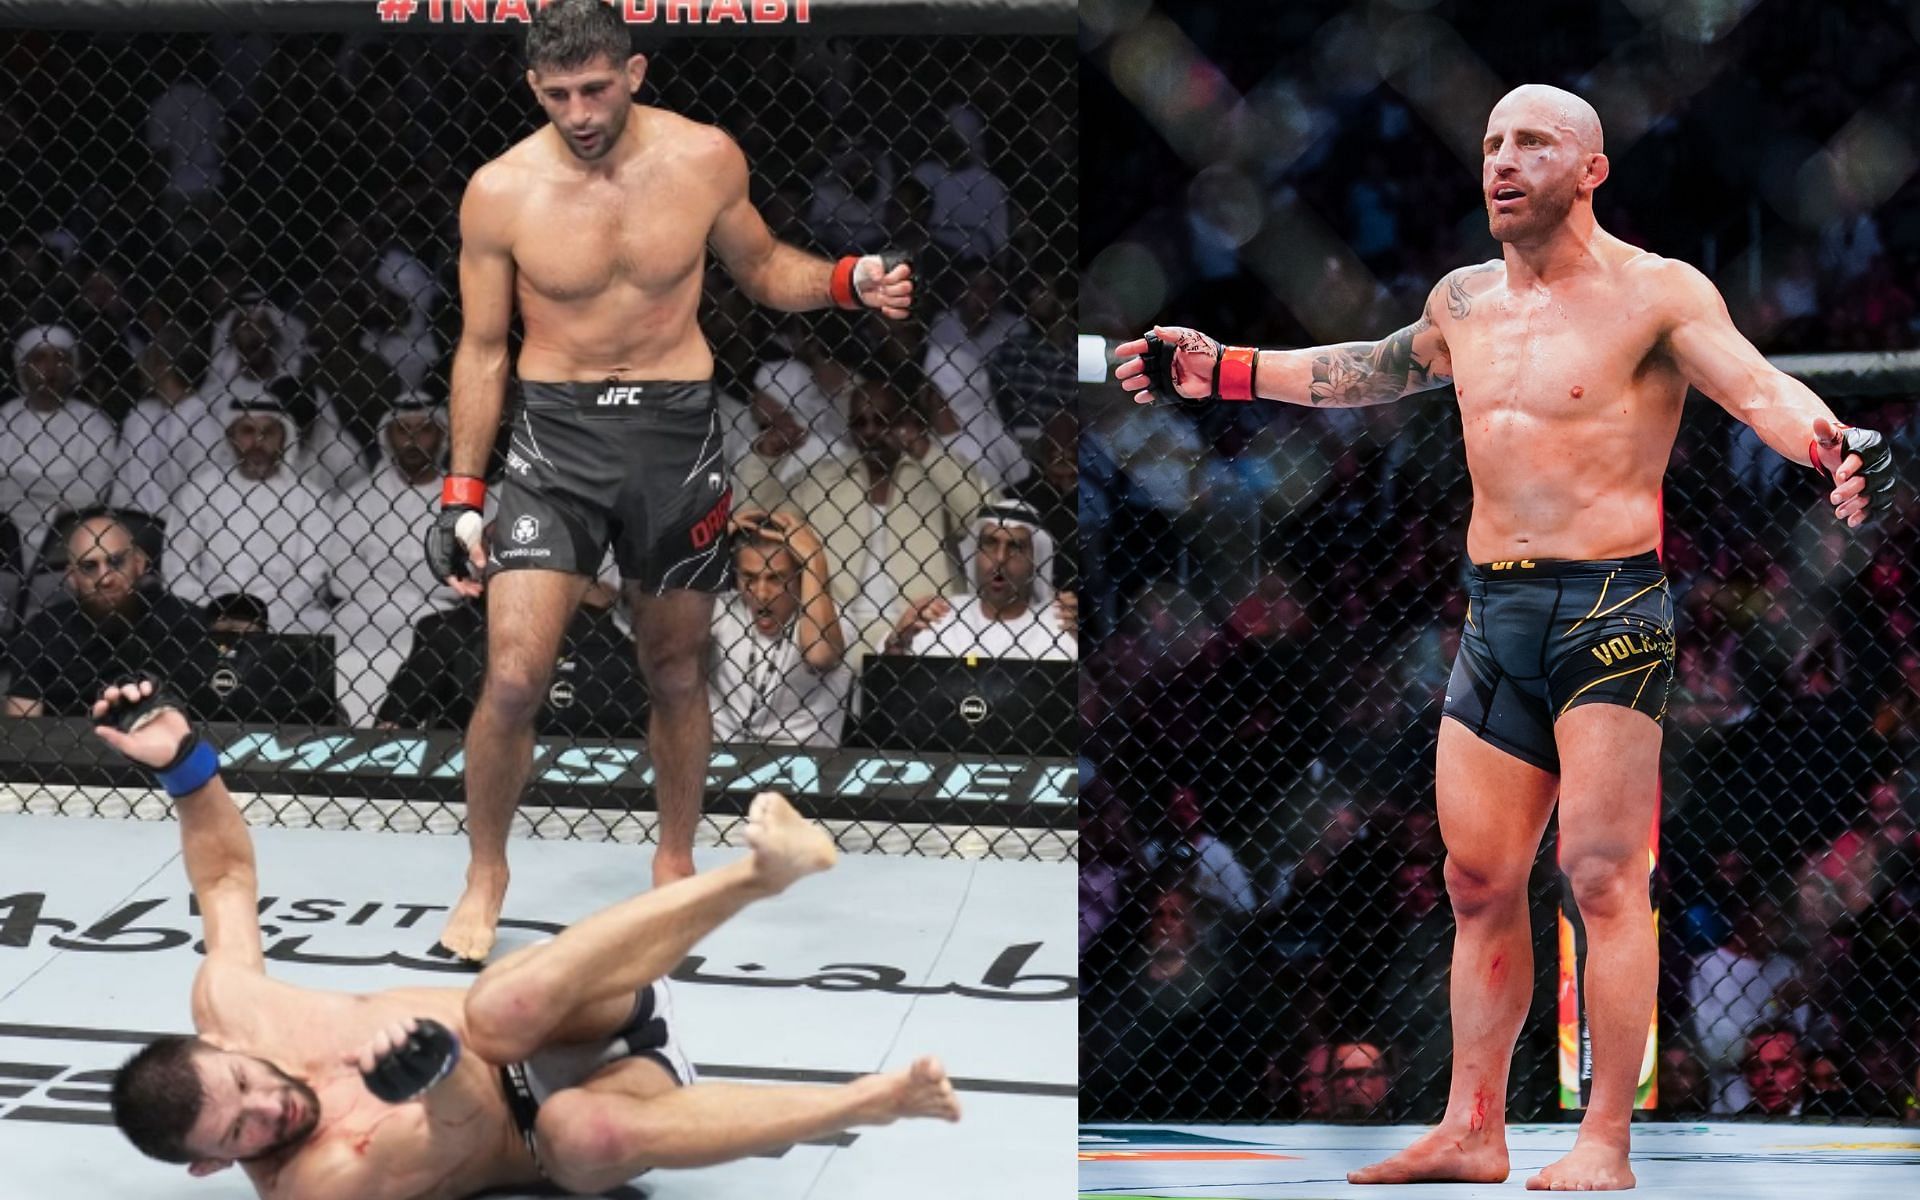 Beneil Dariush vs. Mateusz Gamrot (left) and Alexander Volkanovski (right). [Images courtesy: left image from Instagram @ufc and right image from Getty Images]